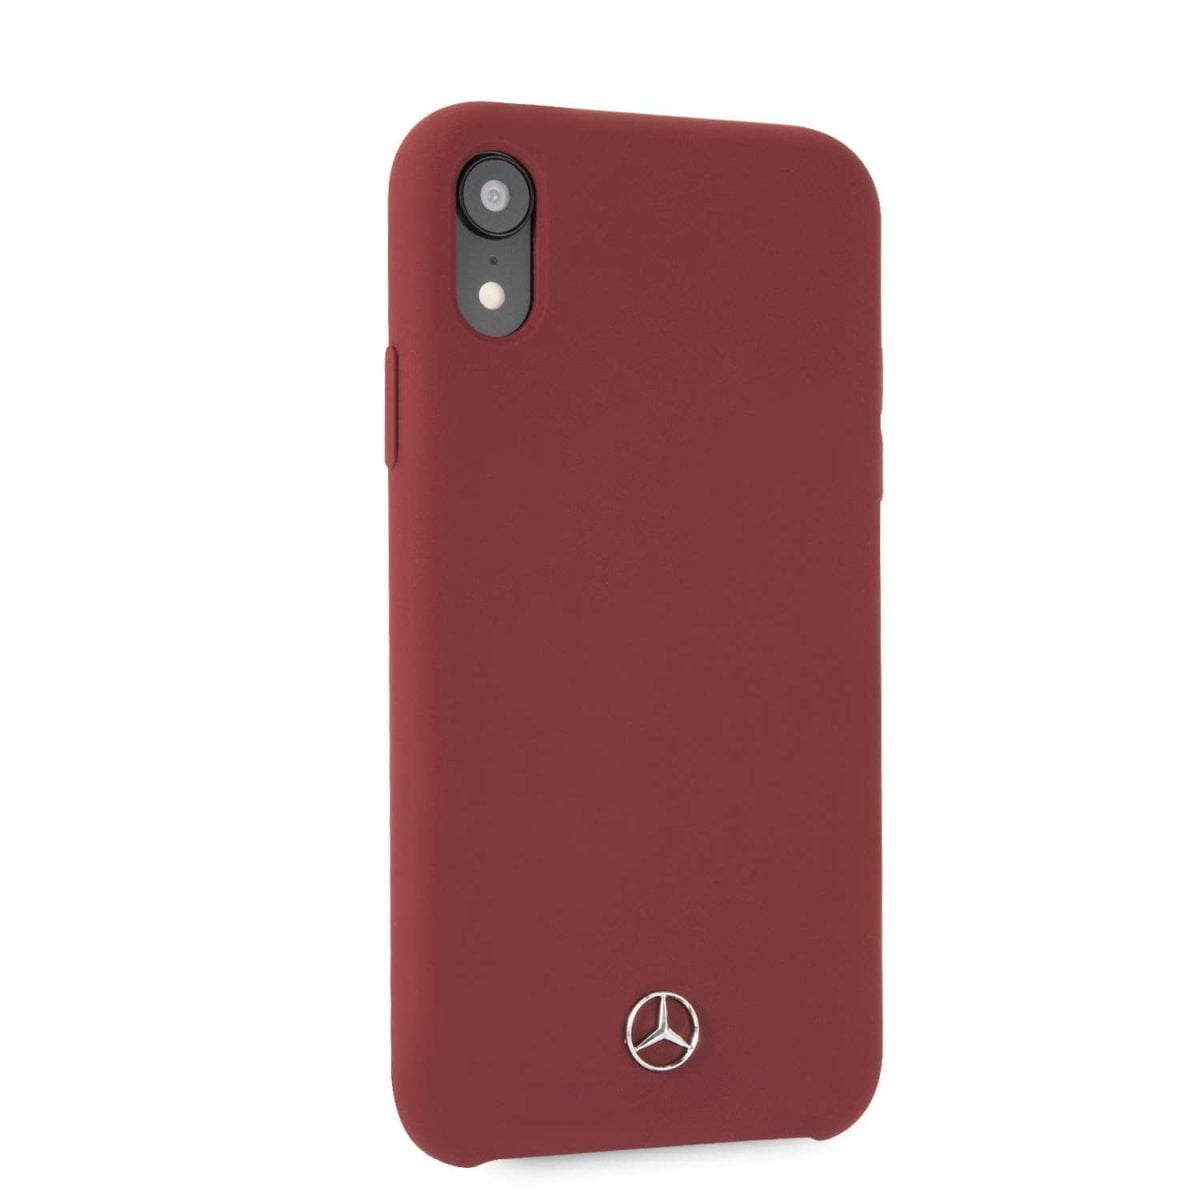 Mercedes Benz Iphone Xr Liquid Silicone Case With Microfiber Lining Red Drop Protection Easily Accessible Ports Officially Licensed 04 &Lt;H1&Gt;Iphone Xs Max Liquid Silicone Case With Microfiber Lining Red (Mercedes-Benz)&Lt;/H1&Gt; &Lt;Span Class=&Quot;Y2Iqfc&Quot; Lang=&Quot;En&Quot;&Gt;Mercedes-Benz Pattern Ii Series. The Minimalist And Captivating Aesthetics Of Mercedes-Benz Interior Design Have Been Transferred Silicon. They Guarantee A Unique Look And Safety For Your Phone. - Leather Case With A Metallic Mercedes-Benz Logo Has A 3D Effect - The Unique Finish Enhances The Look And Quality Of This Case - Designed With Easy Access To Ports And Buttons - Case Compatible With Wireless Chargers Collection: Pattern Line Twister Type: Hardcase Material:silicon Red  Compatibility: Iphone X / Xs Product Manufactured Under License From Mercedes-Benz.&Lt;/Span&Gt; Iphone Cases Iphone Xs Max Liquid Silicone Case With Microfiber Lining Red (Mercedes-Benz)